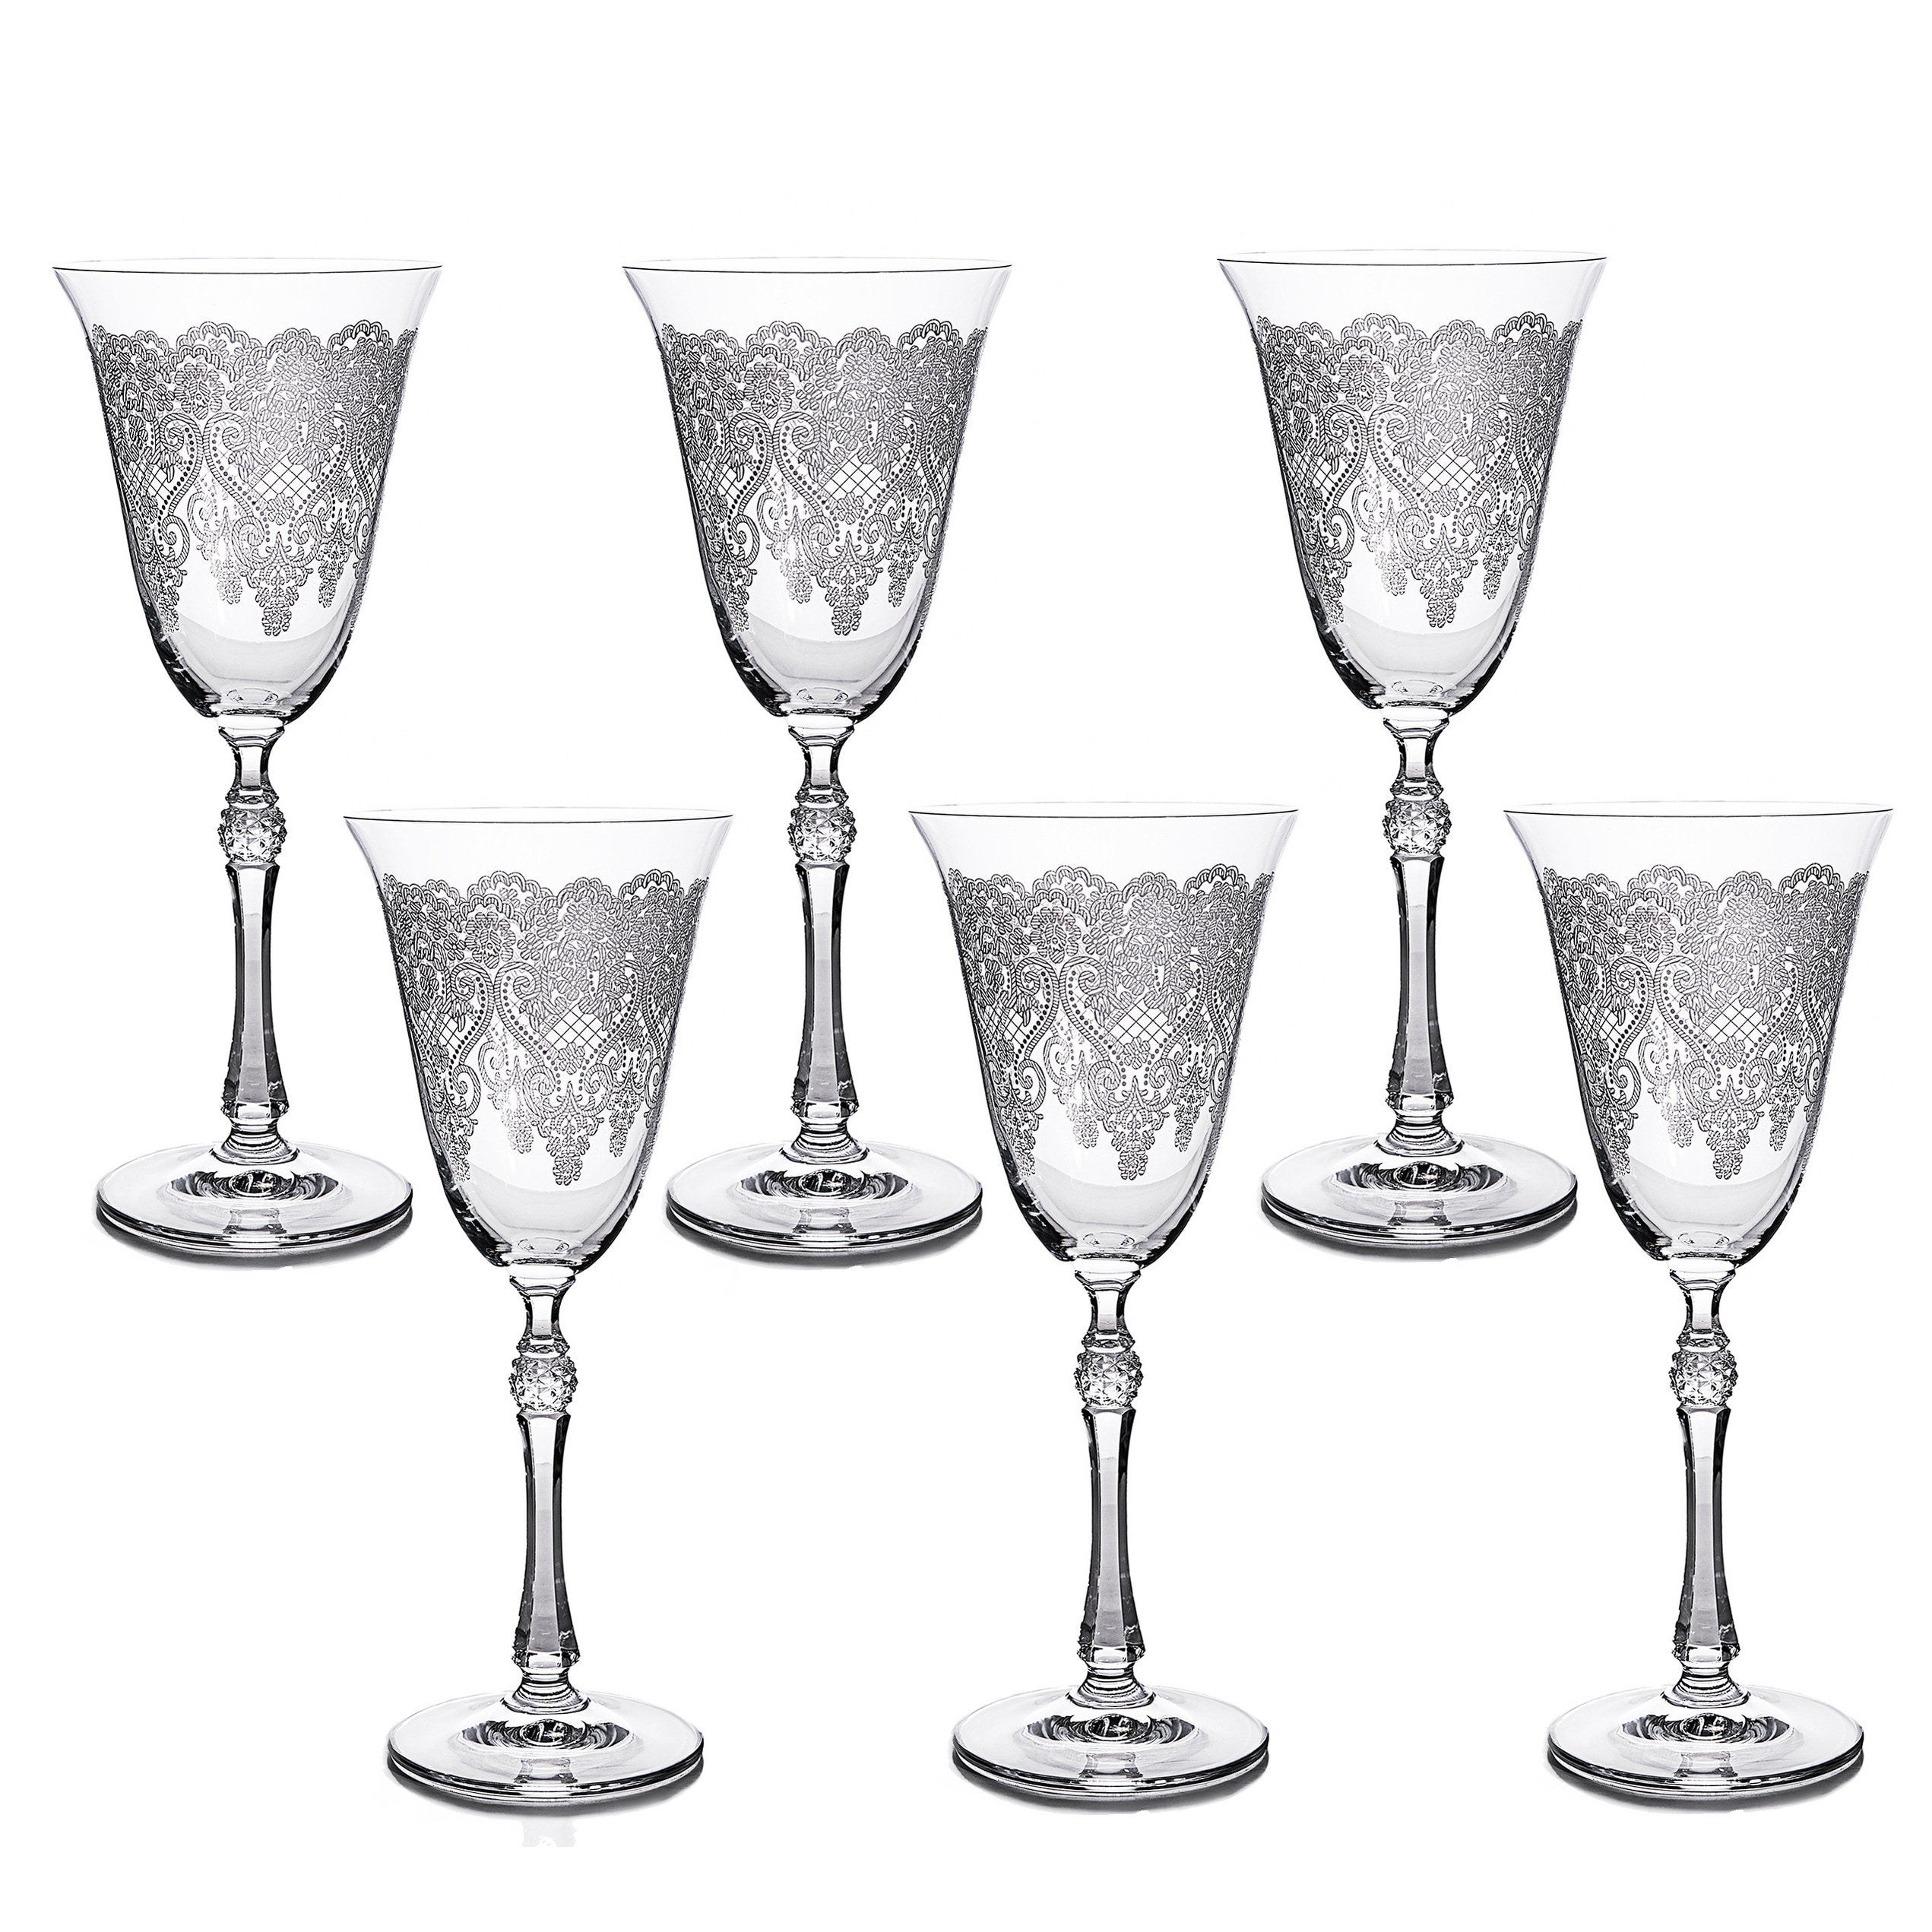 https://ak1.ostkcdn.com/images/products/is/images/direct/65501f157b34db9aed72baae6d871a4d473315b9/Canba-Venice-Wine-Water-Goblet-Set-of-6.jpg